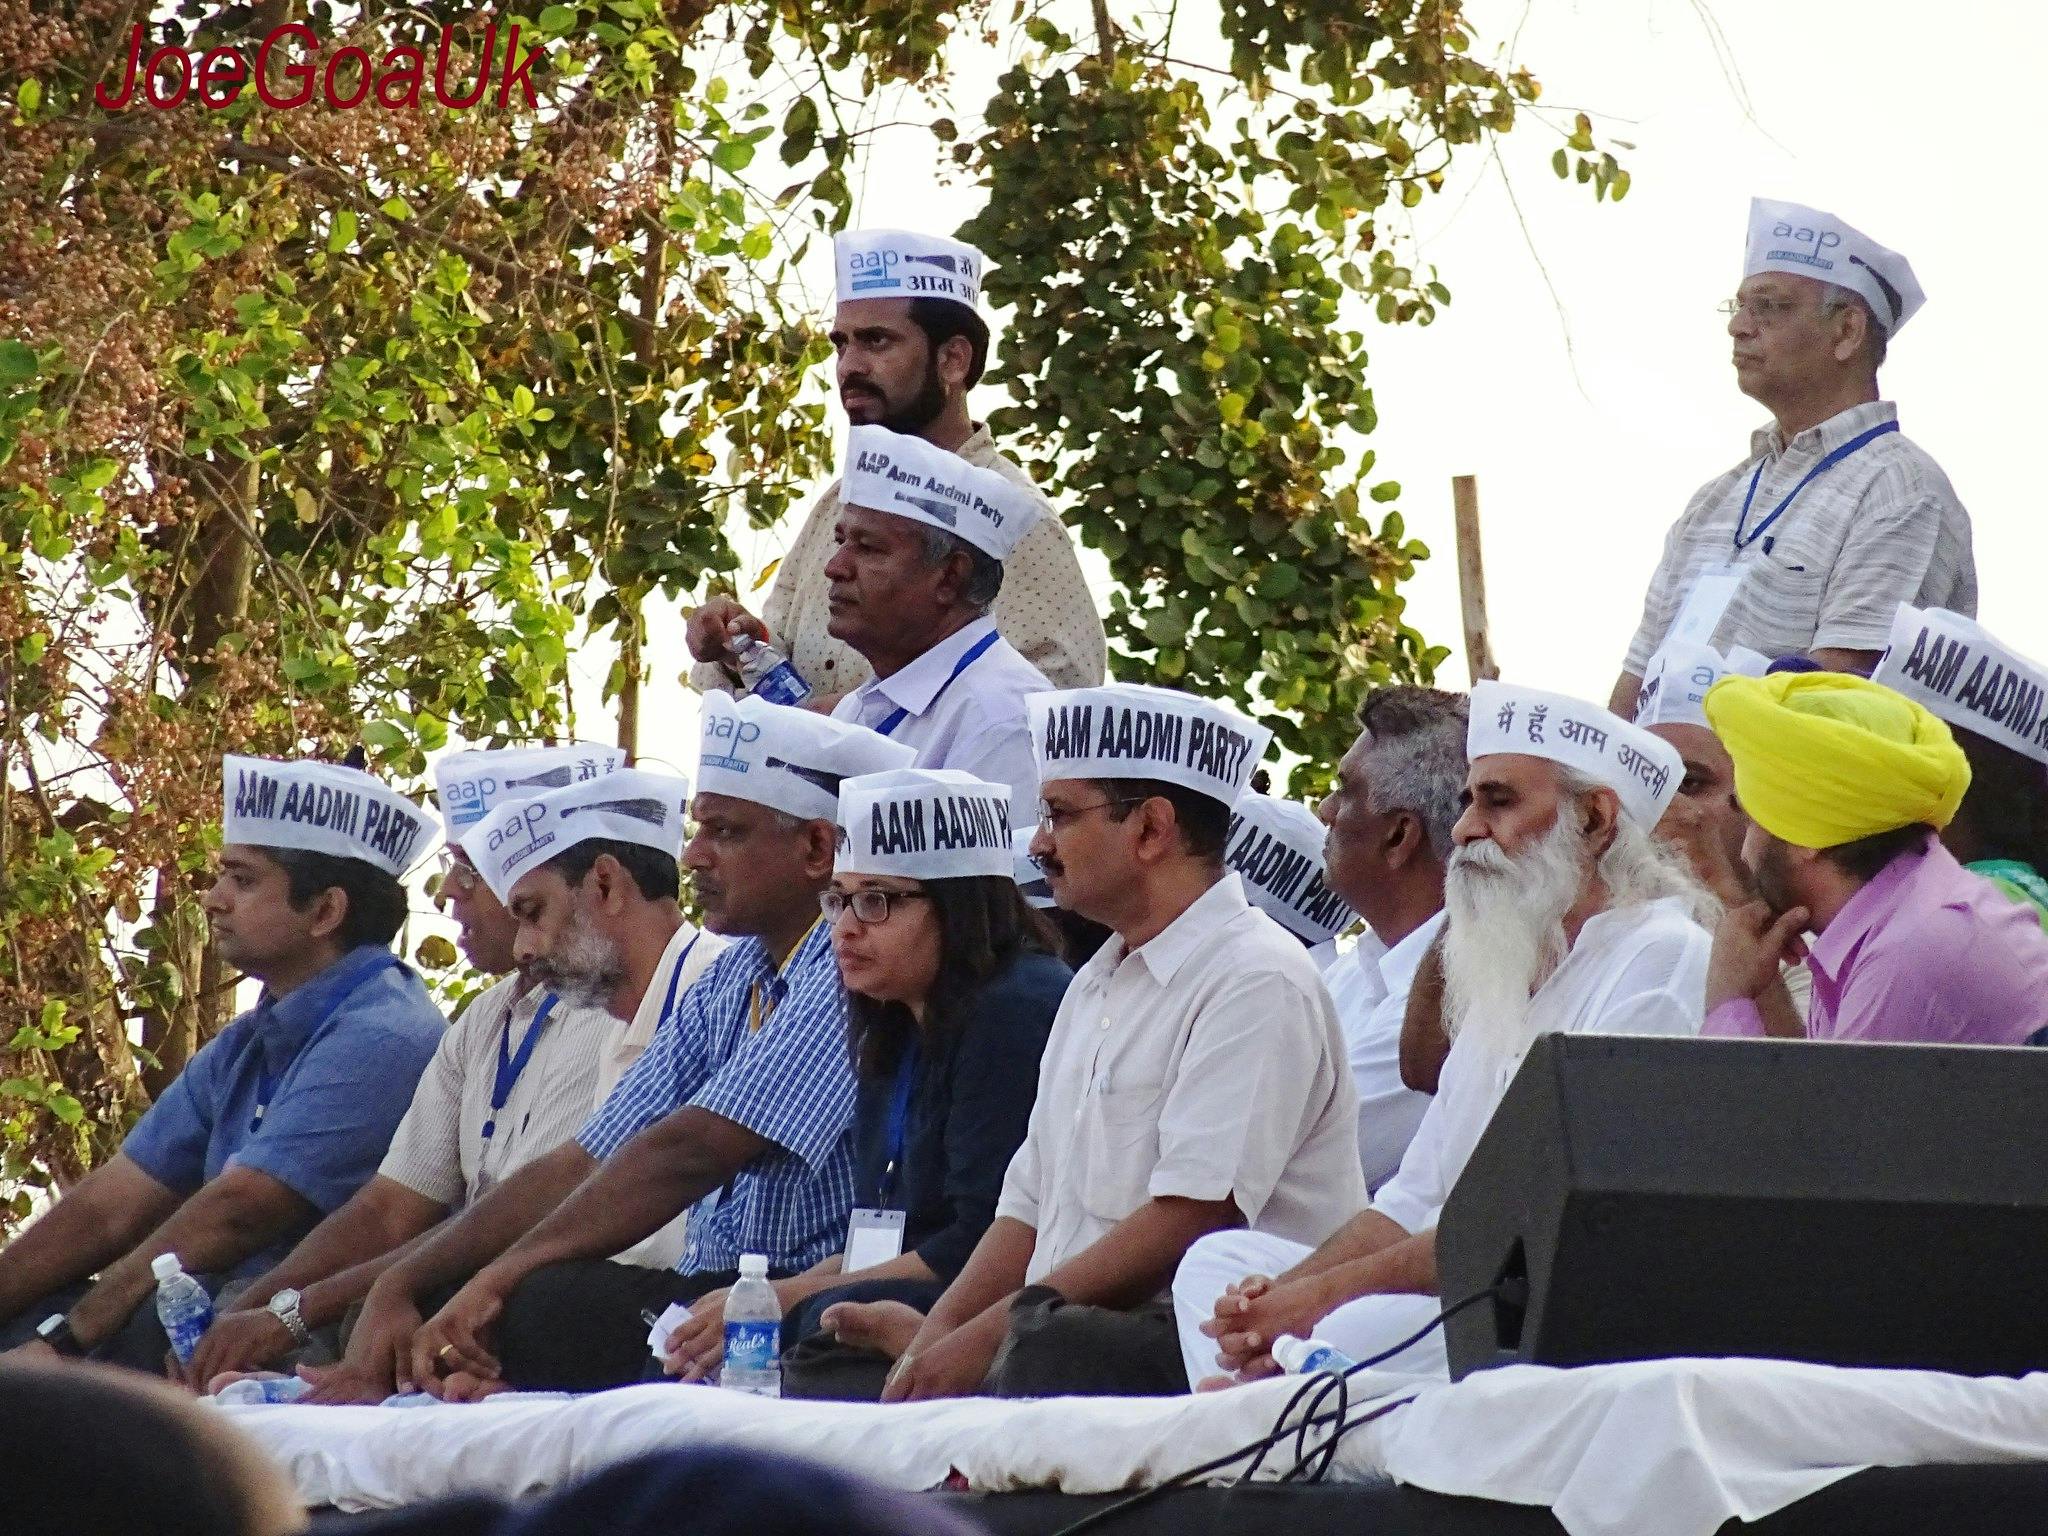 Opinion: The Hope of India’s Aam Aadmi Party